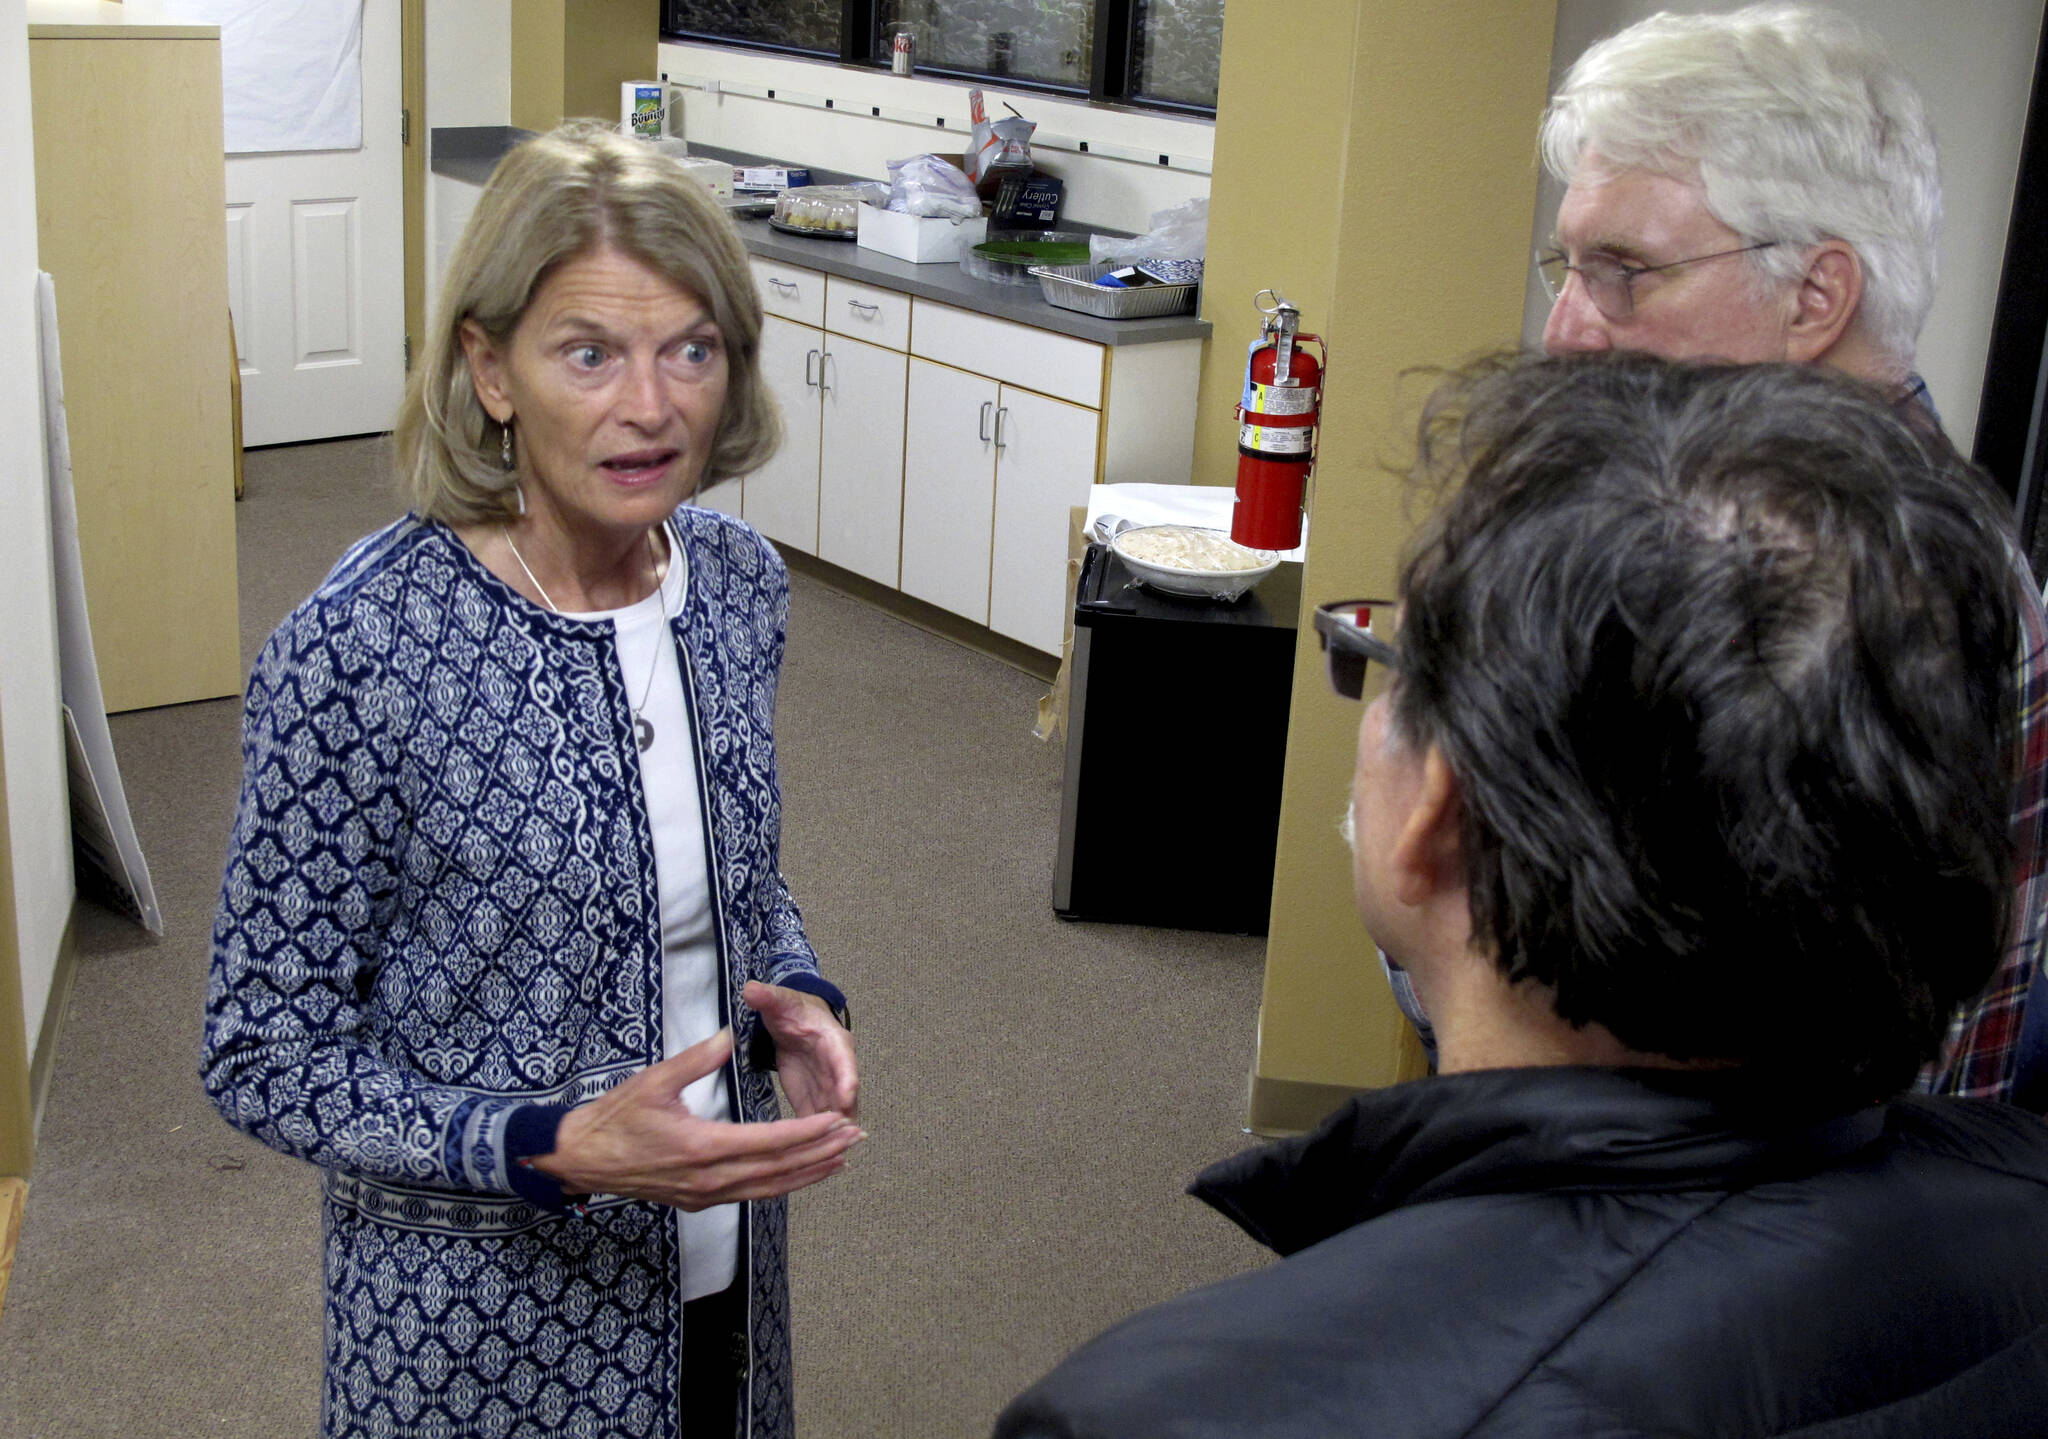 Alaska U.S. Sen. Lisa Murkowski, left, speaks with supporters at the grand opening of her reelection campaign office in Juneau, Alaska, on Thursday, Aug. 11, 2022. Murkowski said she expects to be among the candidates who will advance from the Aug. 16, 2022, U.S. Senate primary in Alaska. Under a system approved by voters and being used in Alaska for the first time this year, the top four vote-getters in the primary, regardless of party affiliation, will advance to the November general election, in which ranked voting will be used. (AP Photo / Becky Bohrer)